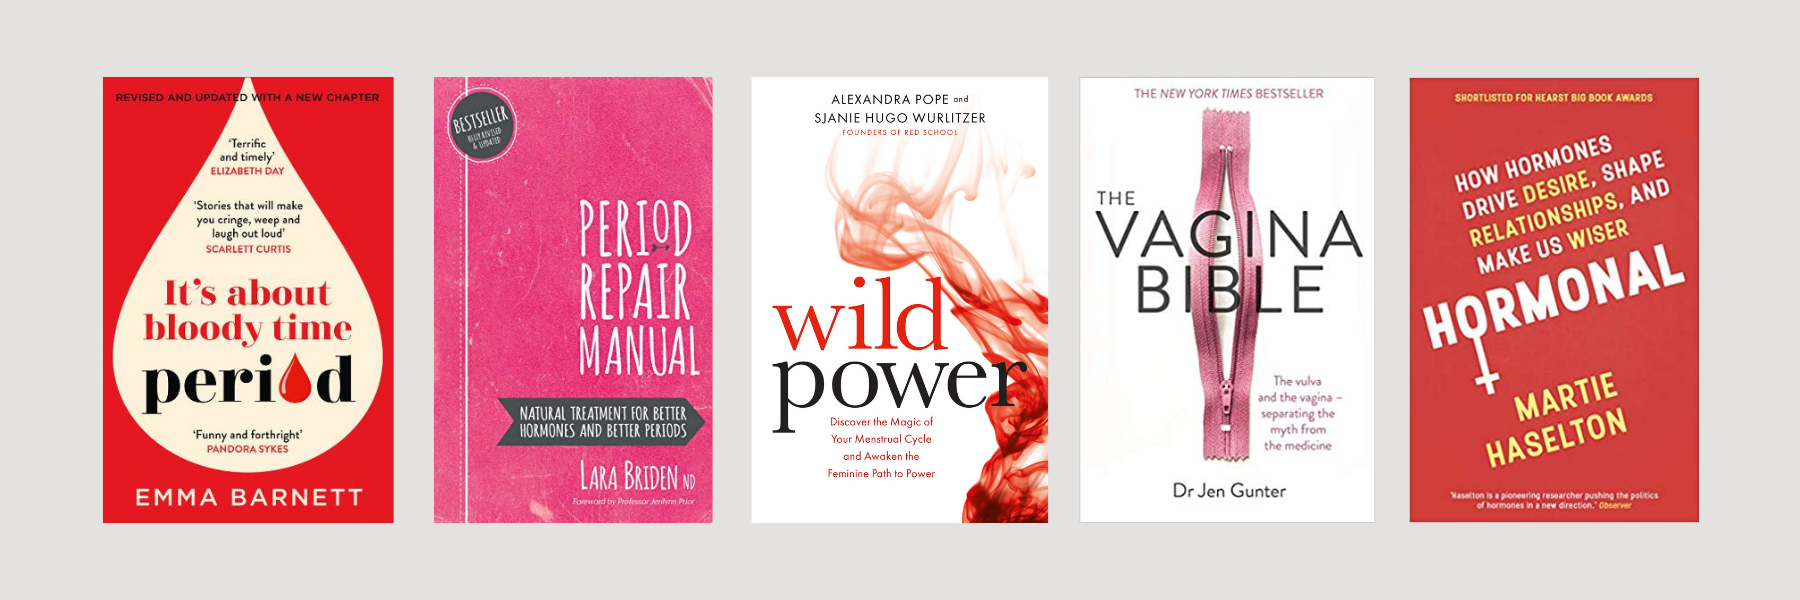 Periods and menstruation books. Period power.